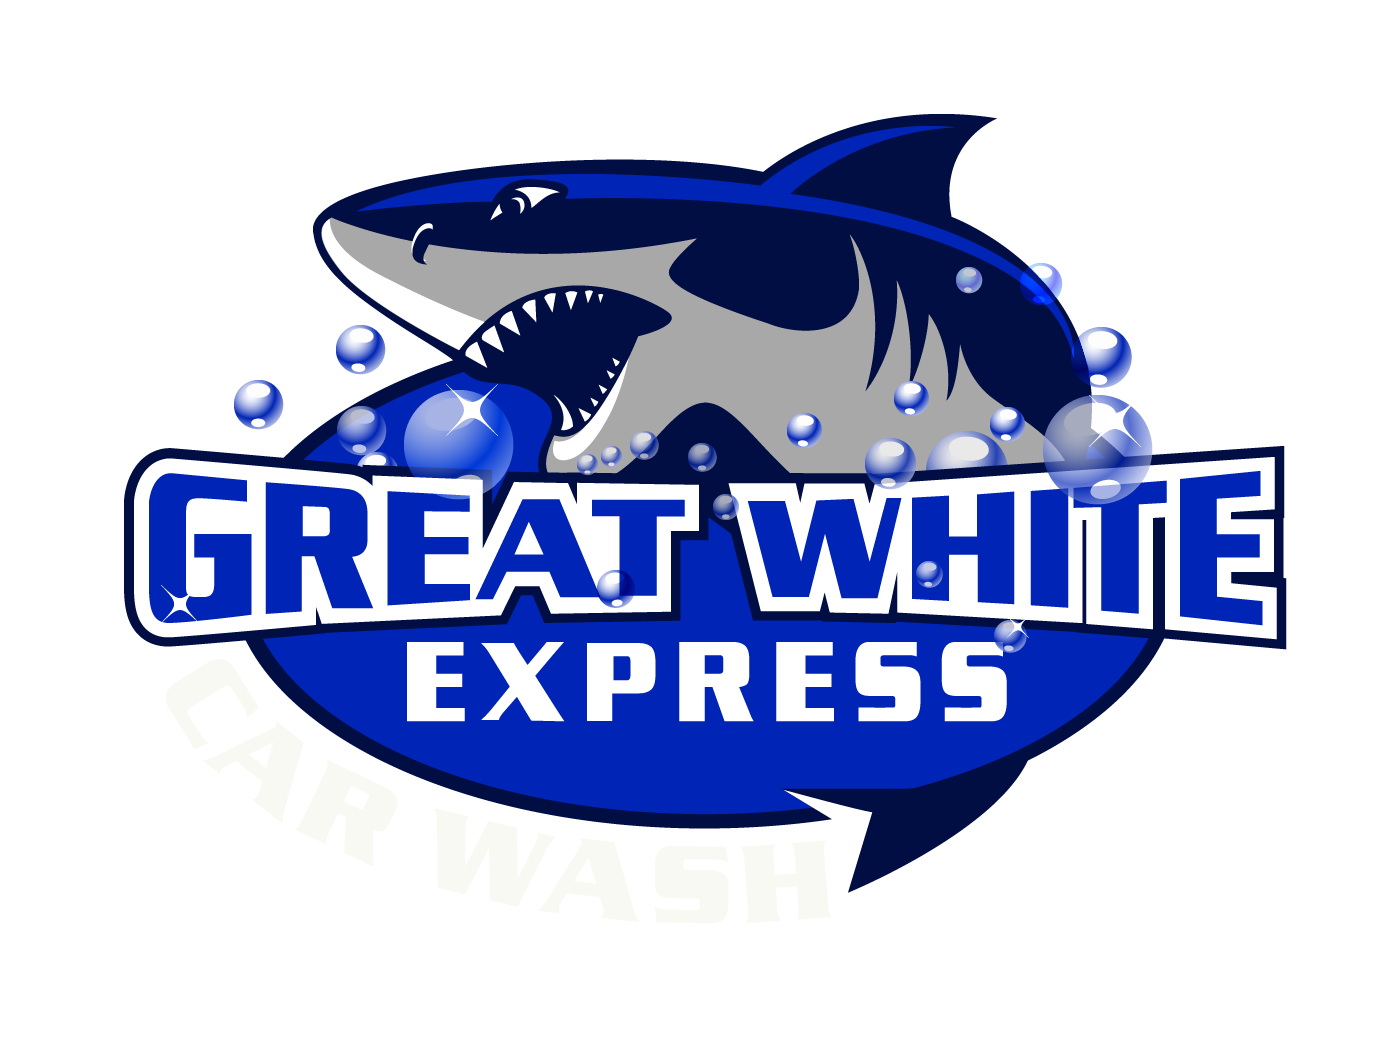 Great White Express